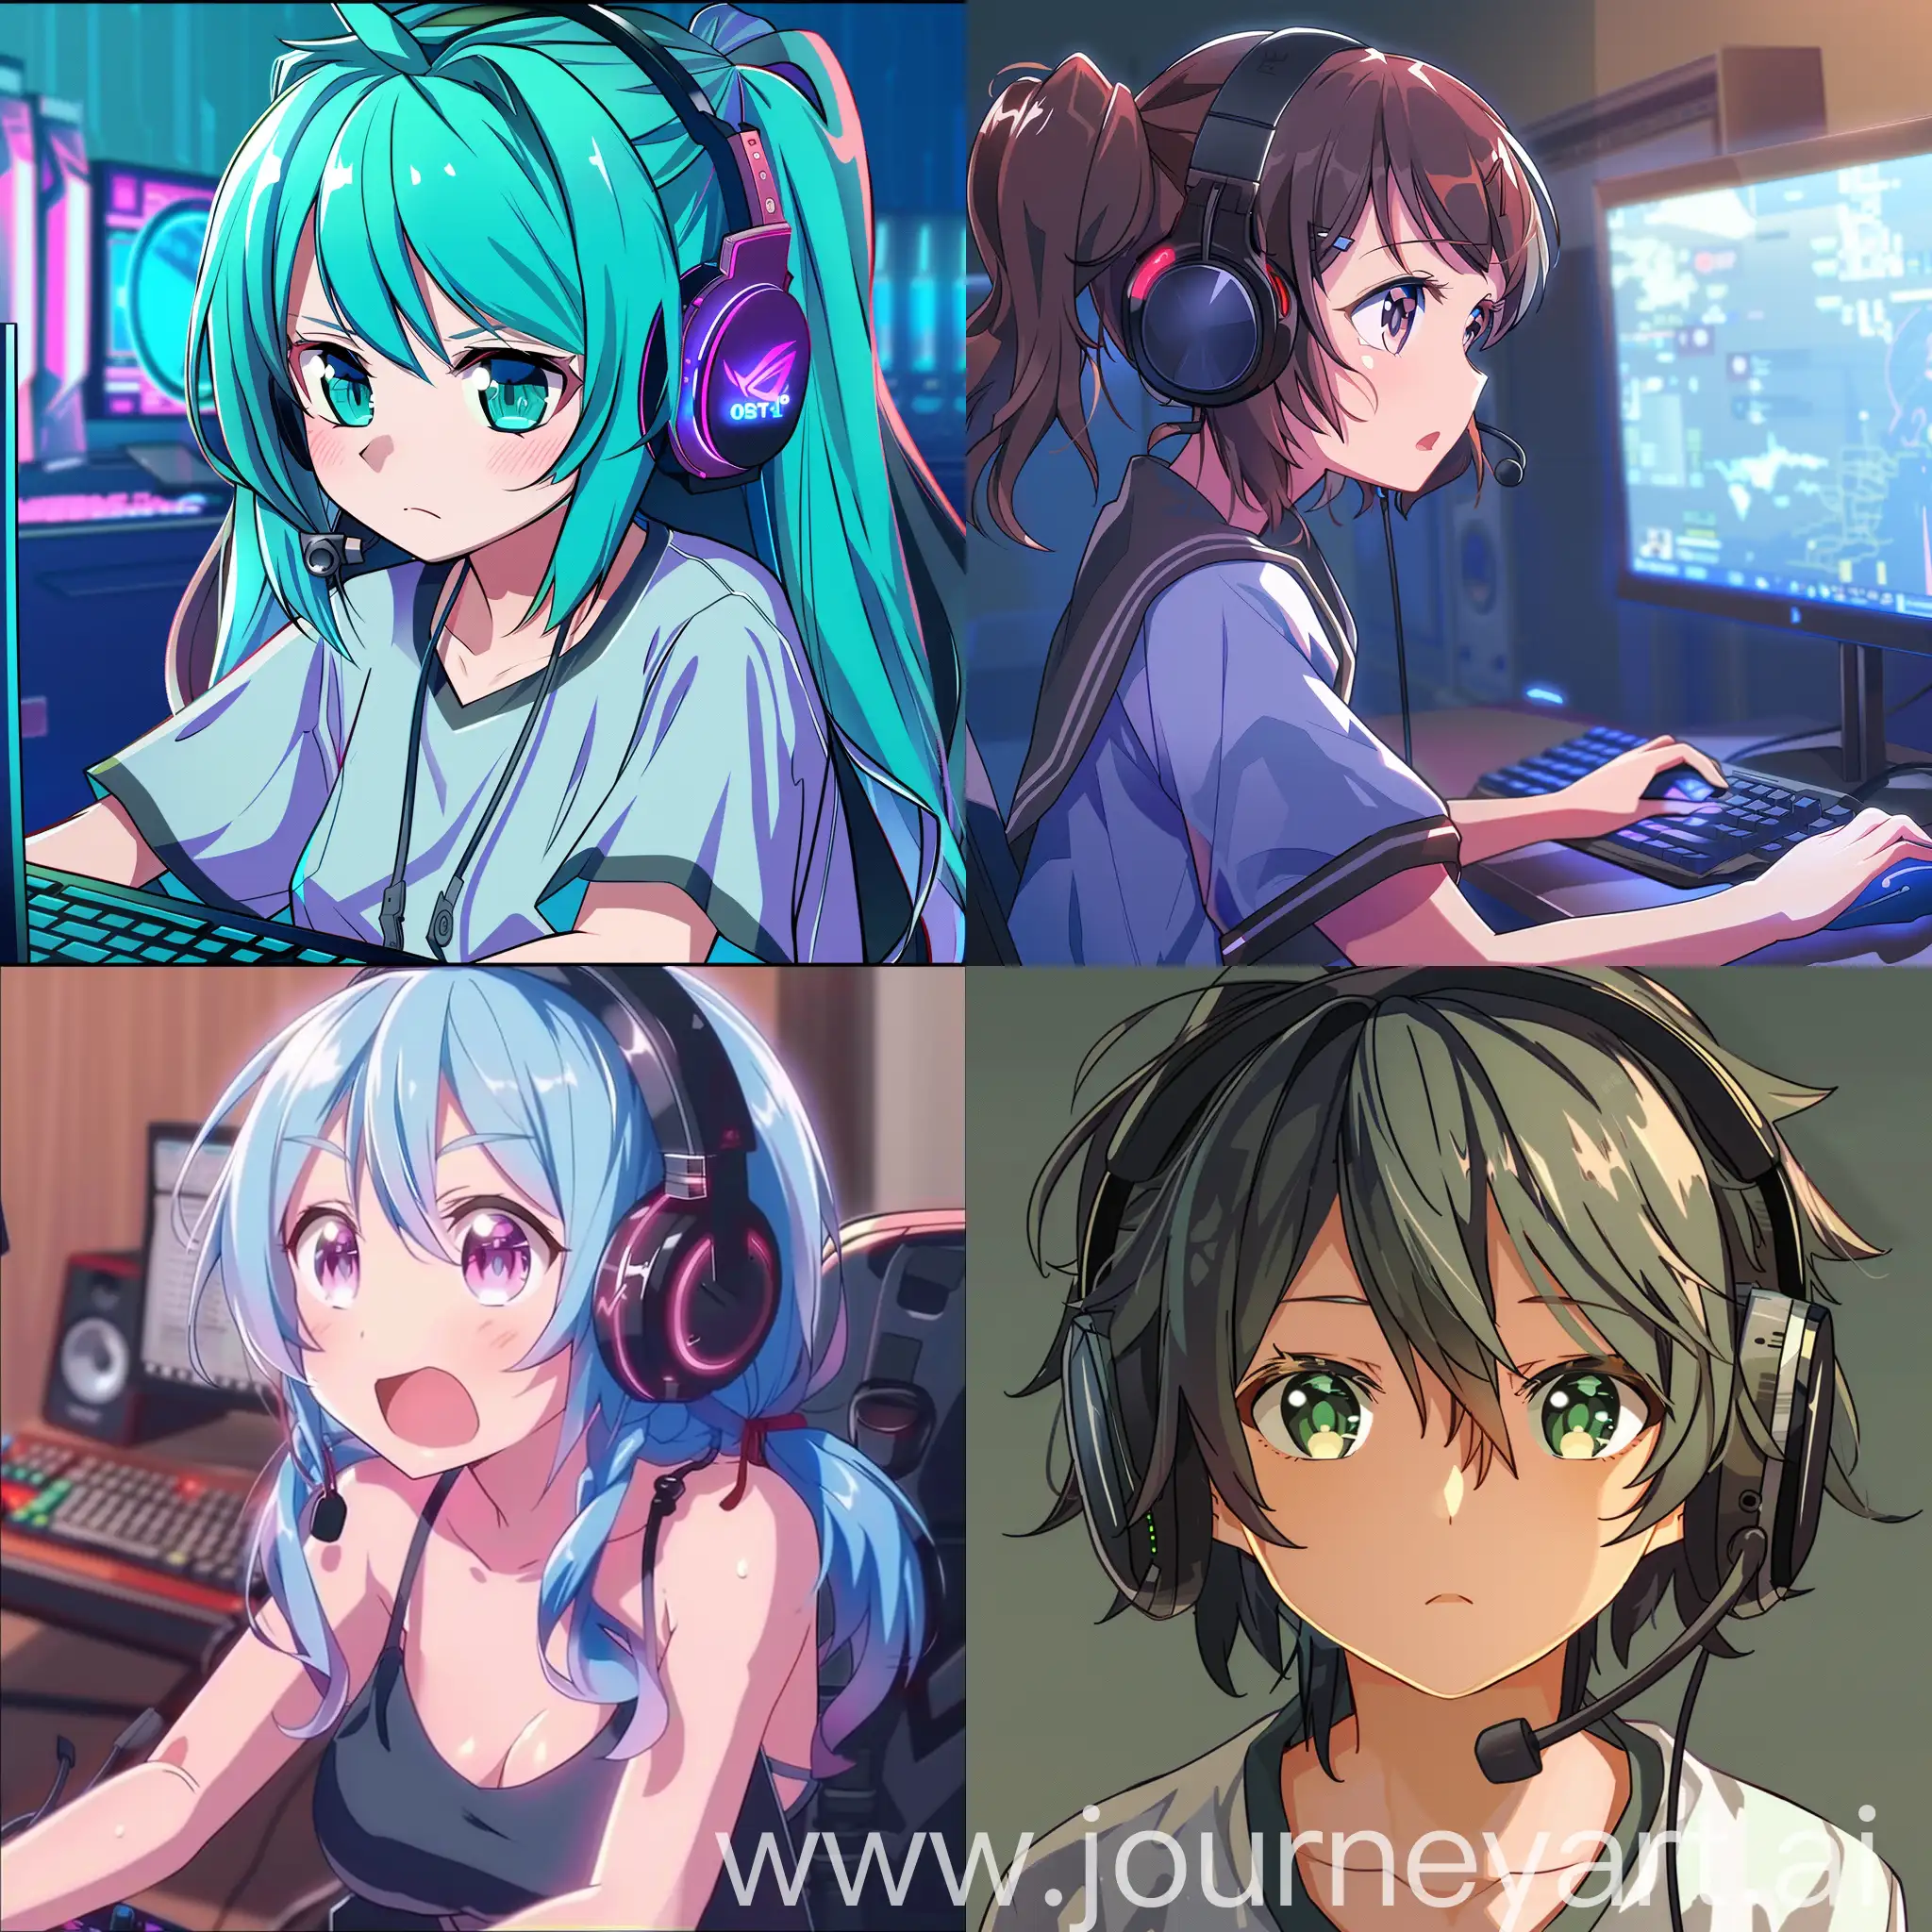 a stereotypical PC player in osu!